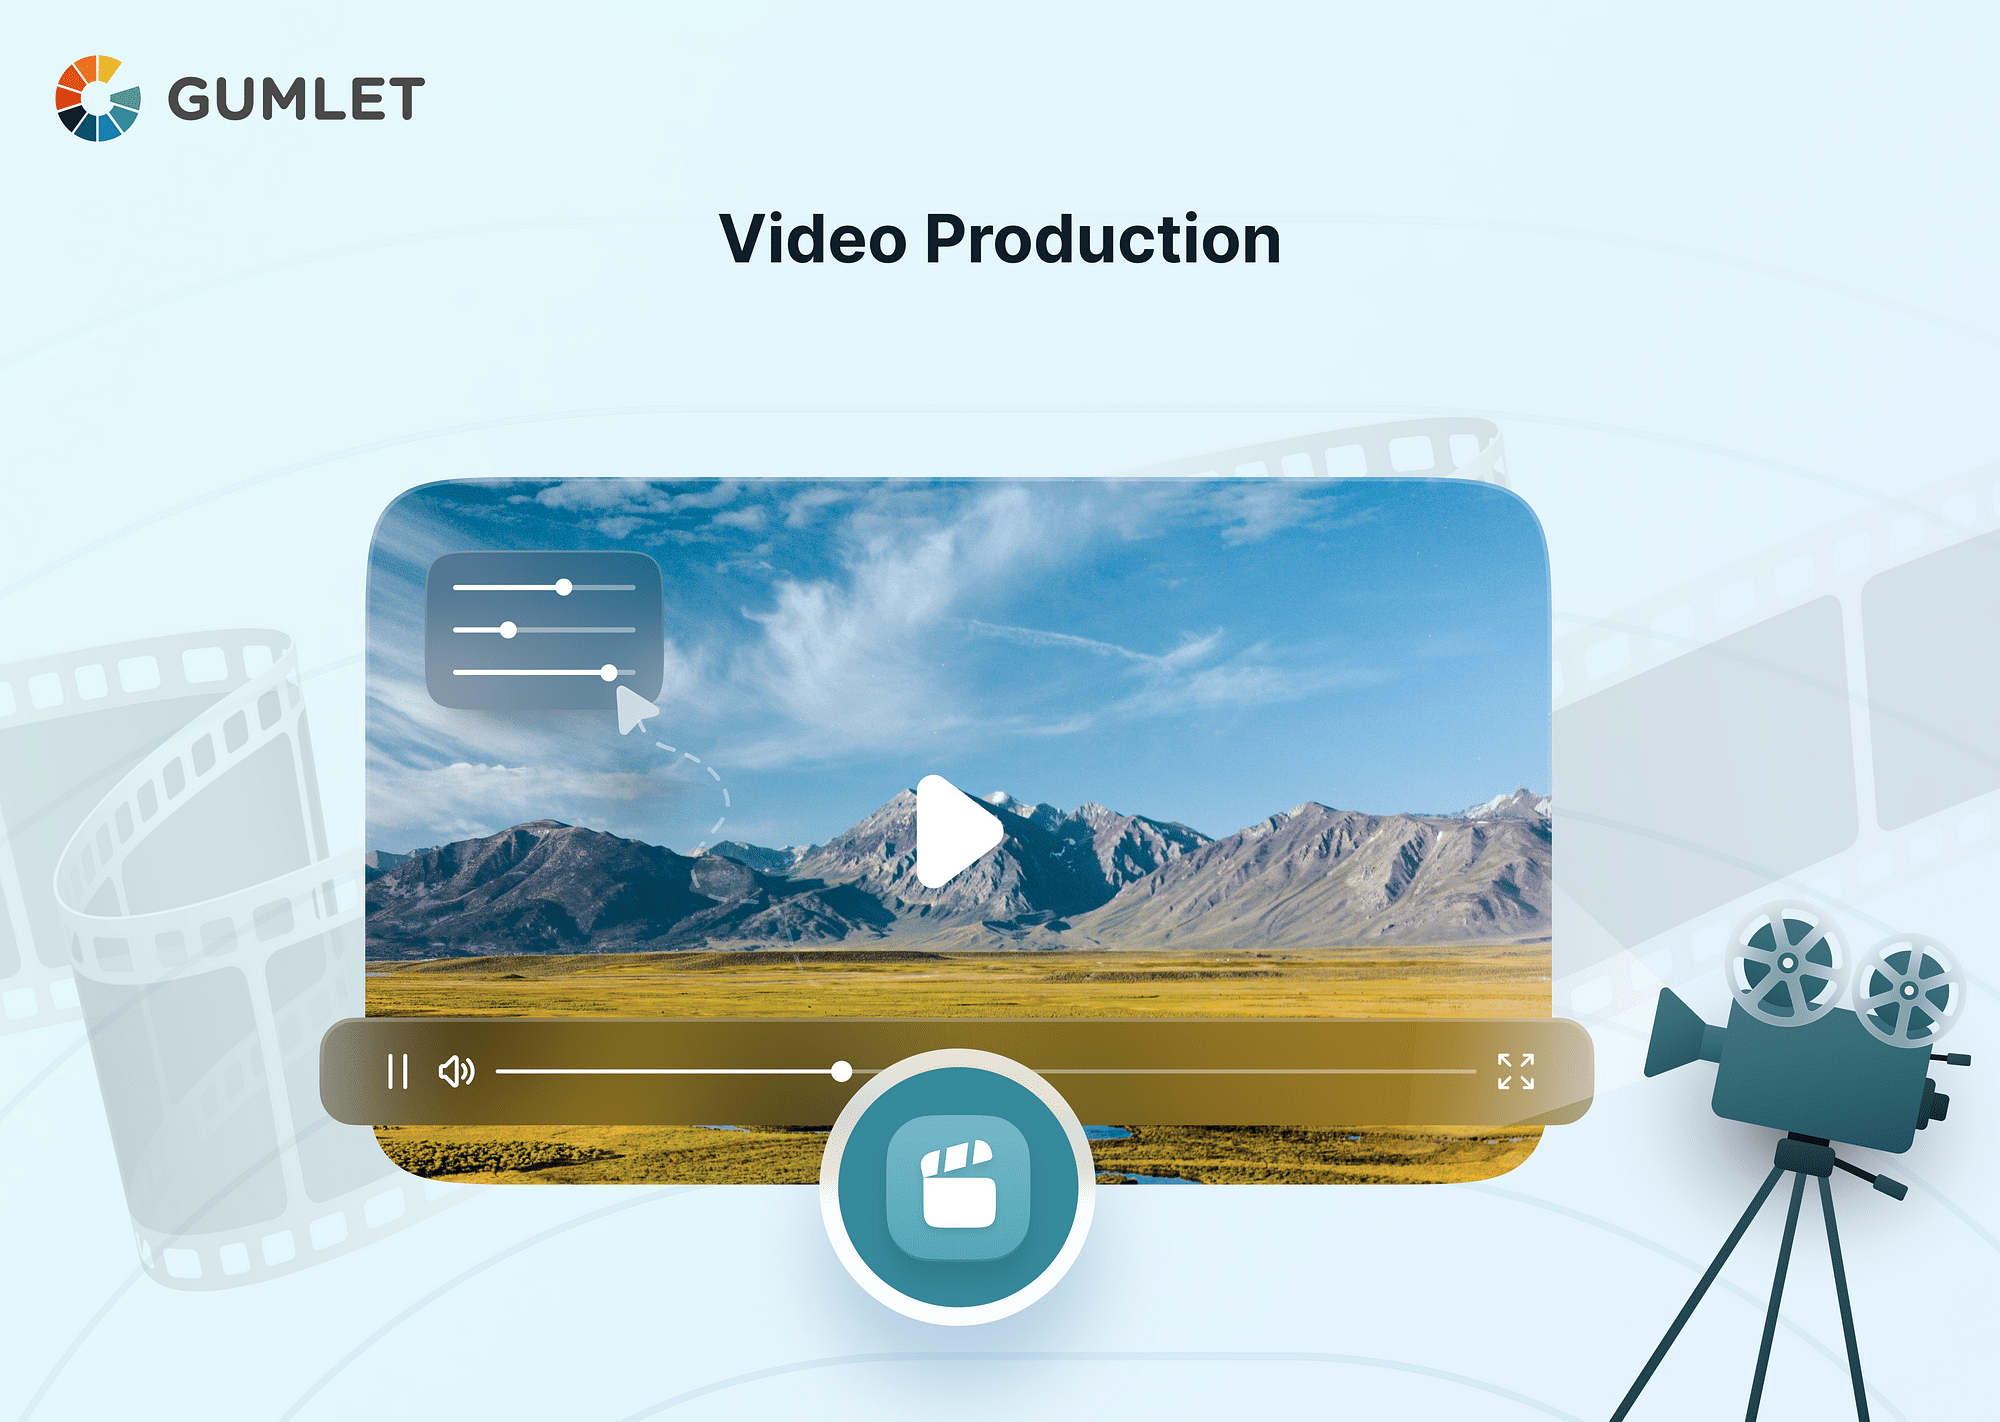 Video Production 101: A Complete Guide to Making Videos